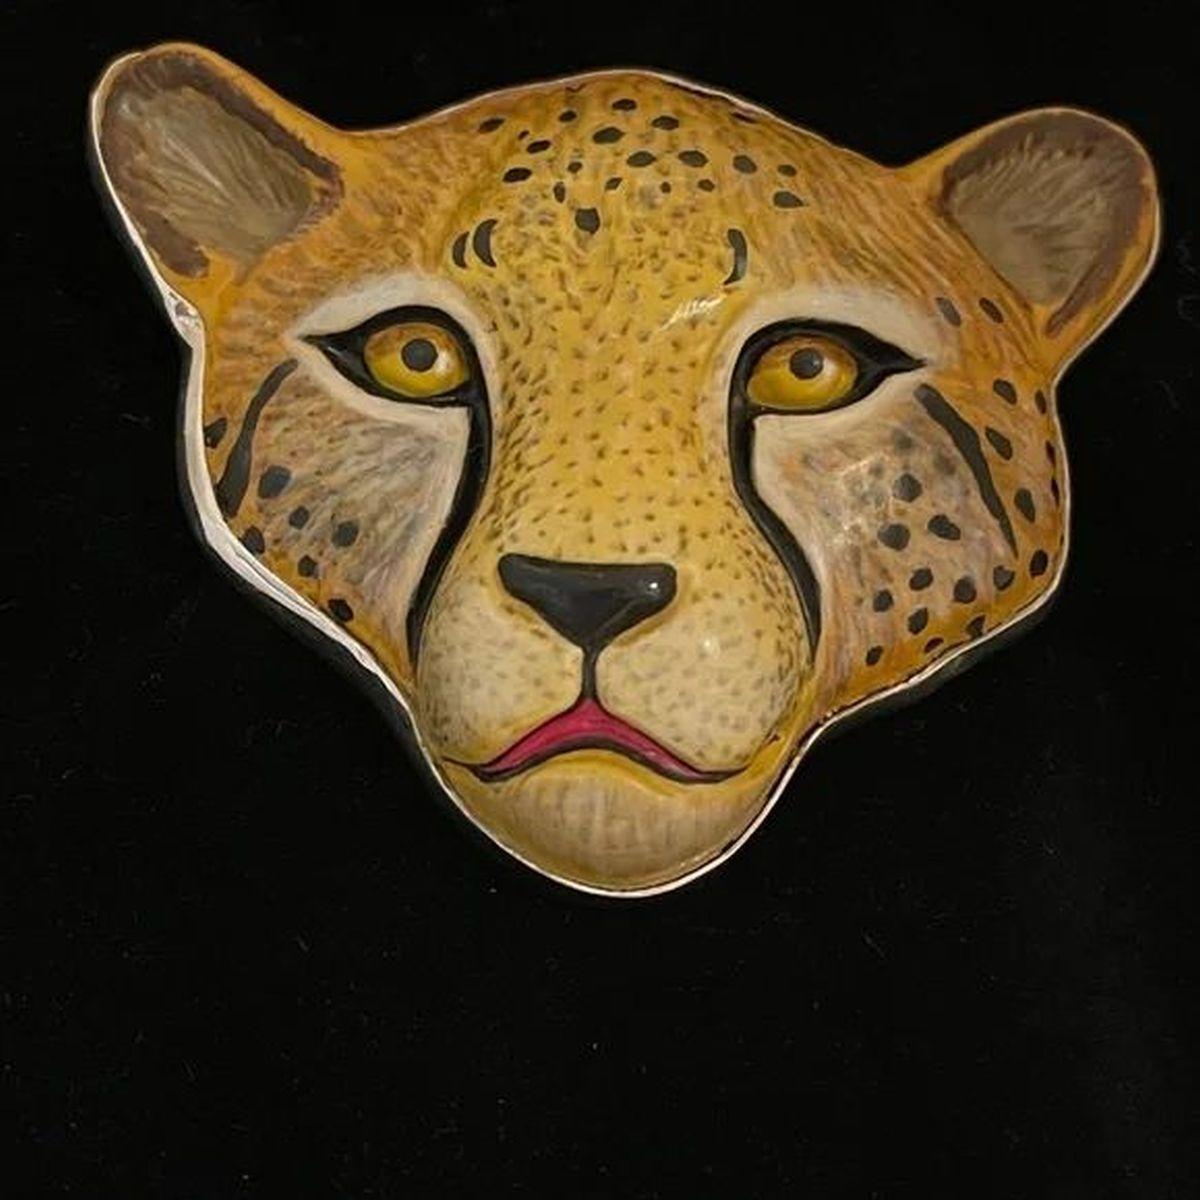 Simply Beautiful! Designer Signed Sergio Bustamante Vintage Mid Century Modern Brooch Pendant. Featuring a Lacquered Paper Mache Cheetah Head Sculpture Brooch Pendant. Sterling Silver back, marked 925 silver. A loop on the back, can be worn as a